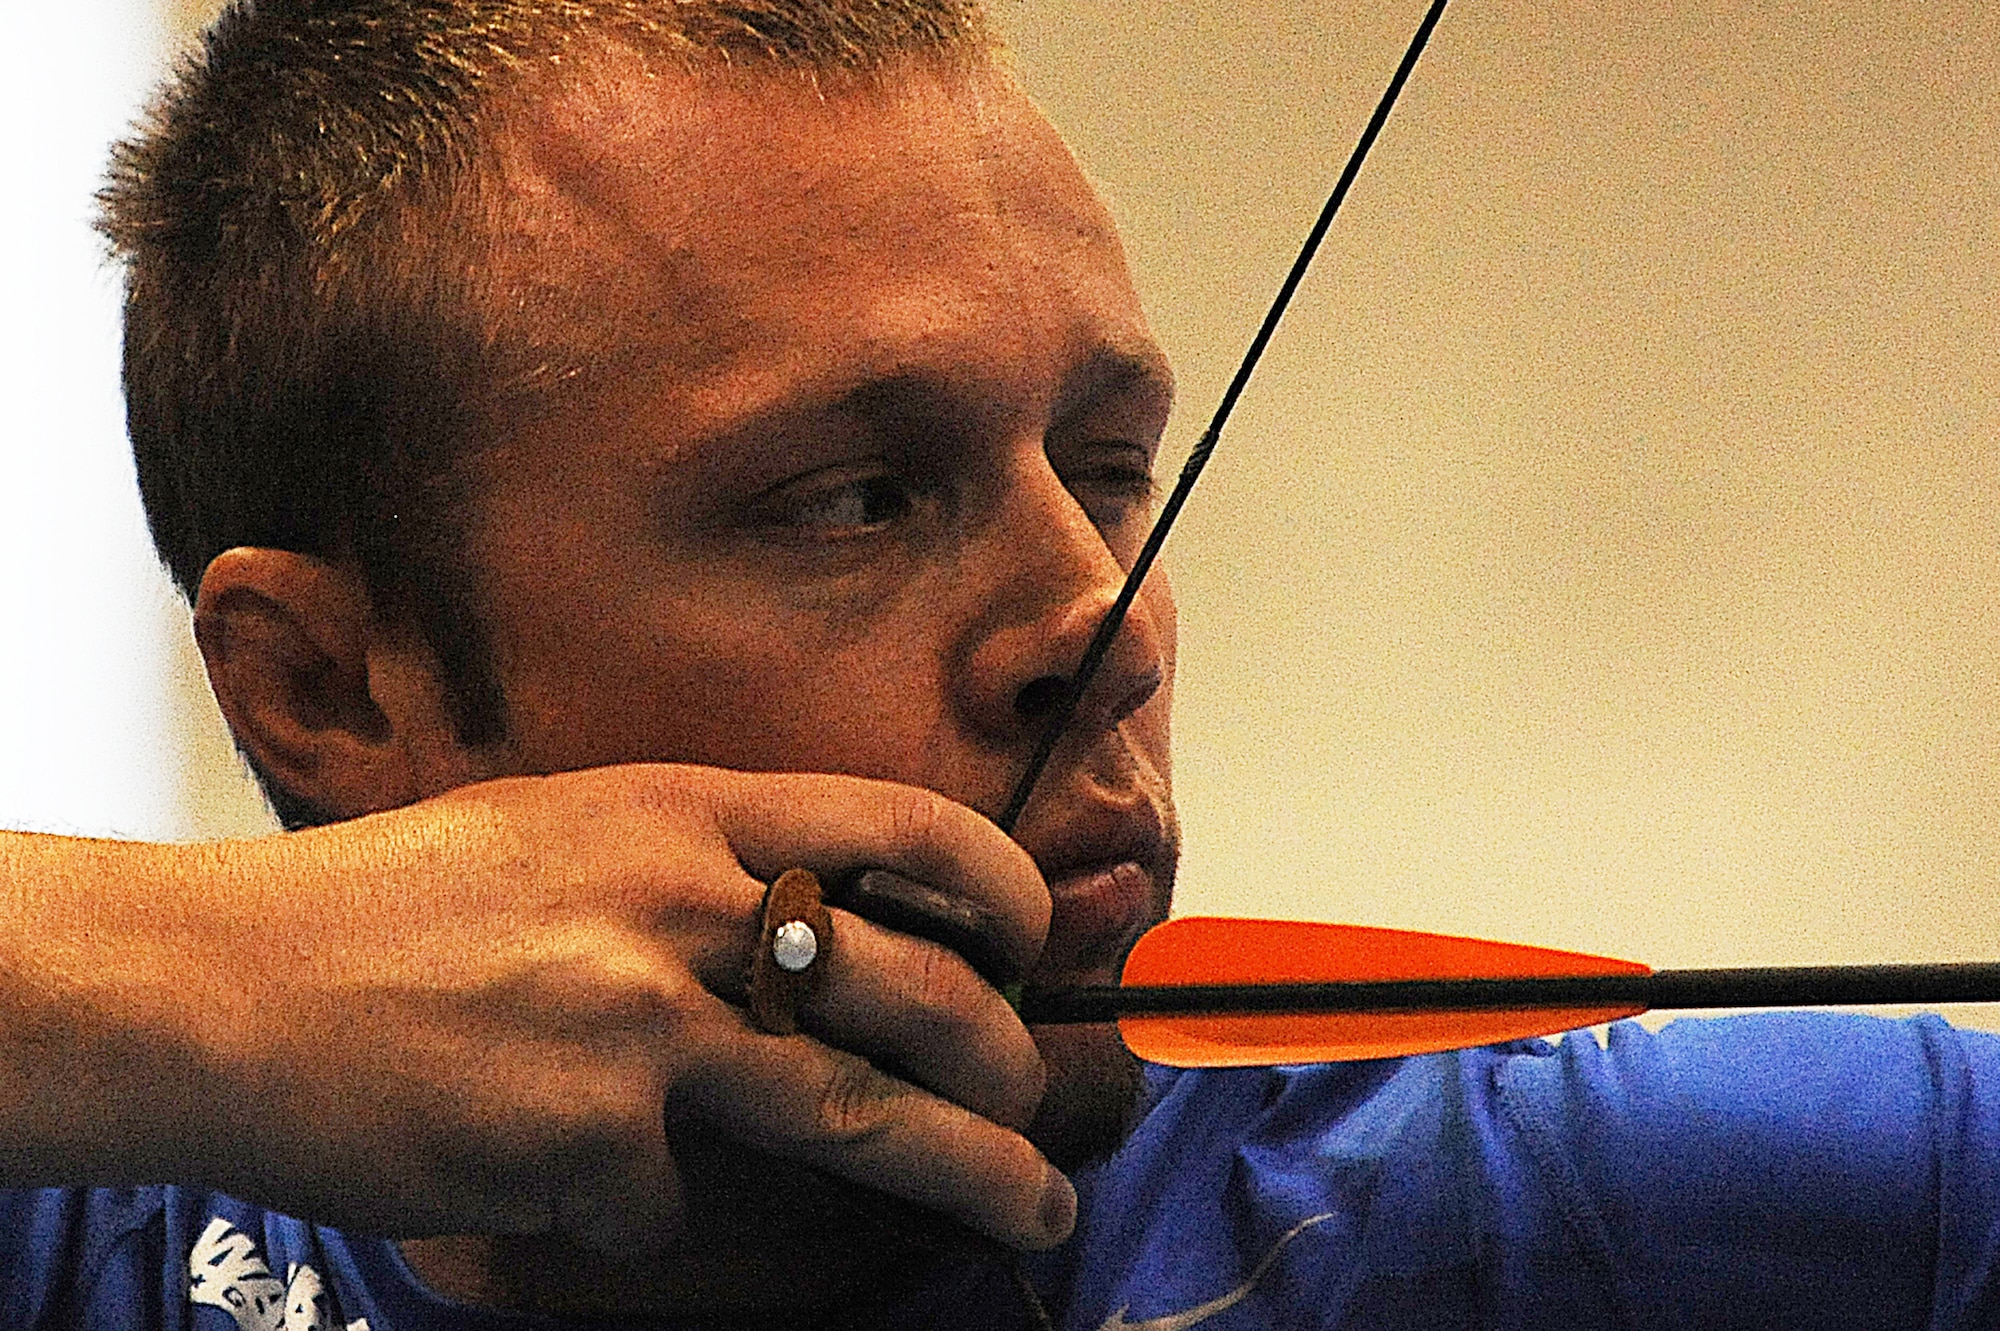 Kendall Madden aims at his target during the archery competition of the 2012 Warrior Games at the U.S. Air Force Academy in Colorado Springs, Colo., May 2, 2012. Madden is with the Air Force team. (U.S. Air Force photo/Val Gempis) 